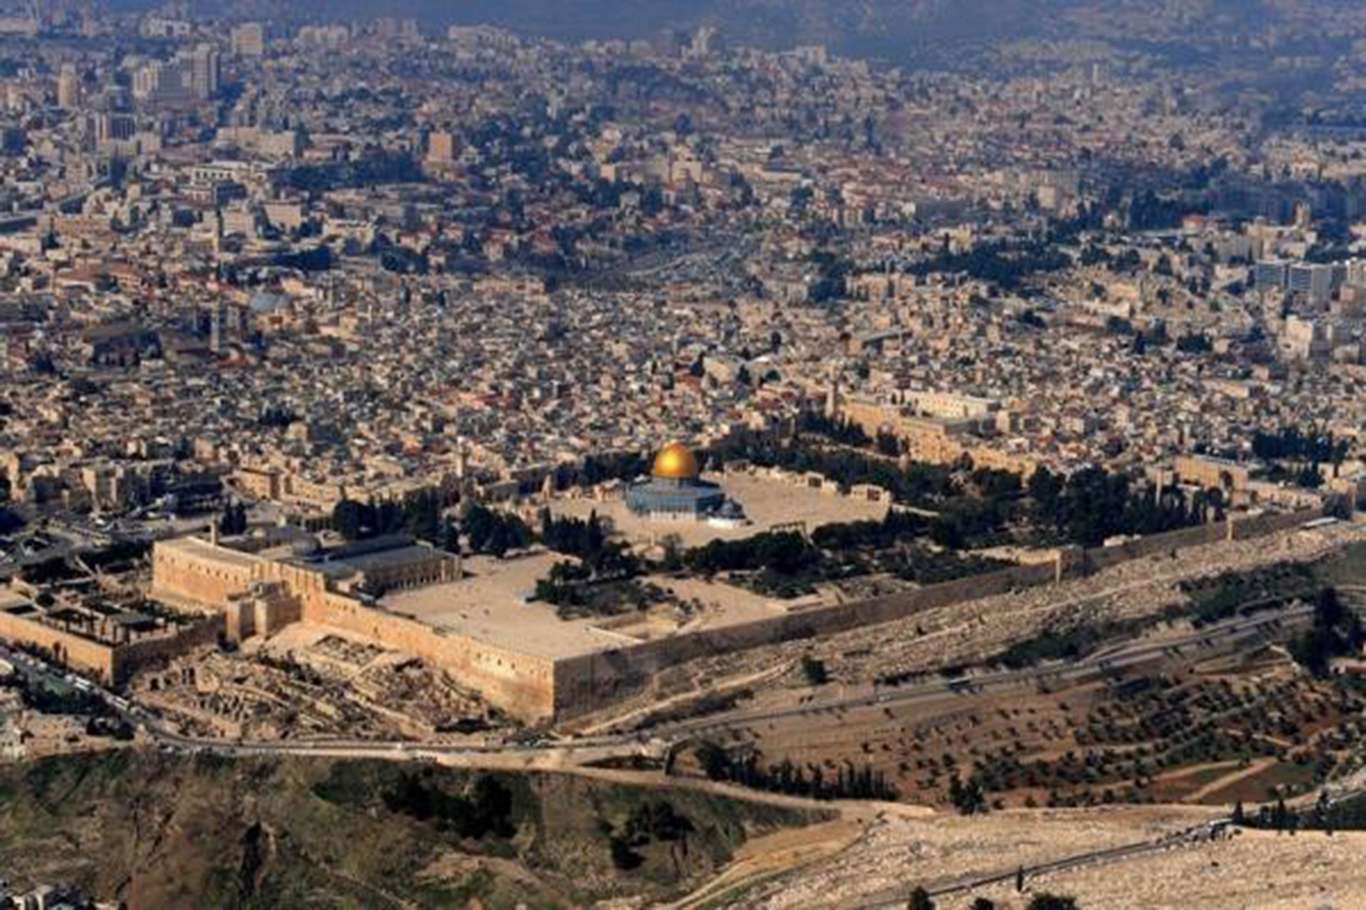 Jerusalem will remain the indivisible, eternal capital of Palestine, Hamas says